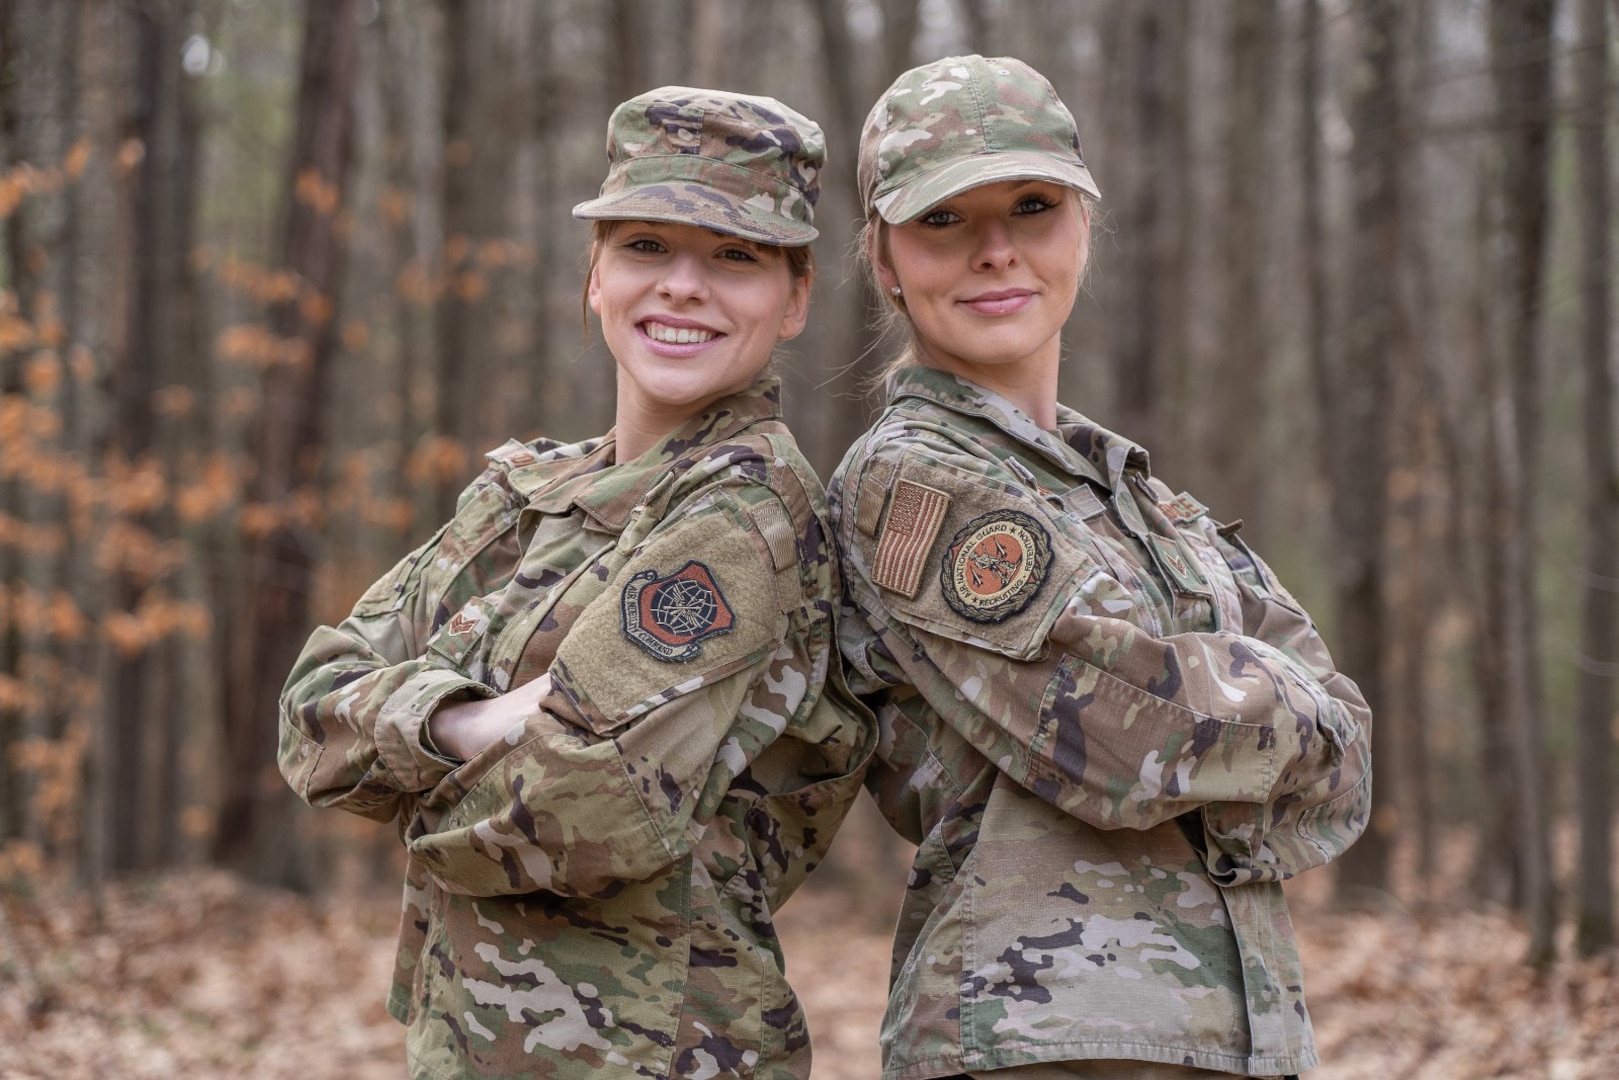 From left, Senior Airmen Gillian and Olivia Conley, fraternal twin sisters, pose in Northfield, New Hampshire, on Dec. 10, 2022. The Conleys first enlisted in the New Hampshire Air National Guard in 2017 and attended basic training and technical school together. Olvia recently transferred to the Connecticut Air National Guard for a full-time recruiting position, while Gillian serves at Pease Air National Guard Base in Newington, New Hampshire, as a respiratory therapist with the 157th Medical Group. They participated in a brief National Twin Day Q&A this year to recognize the holiday.